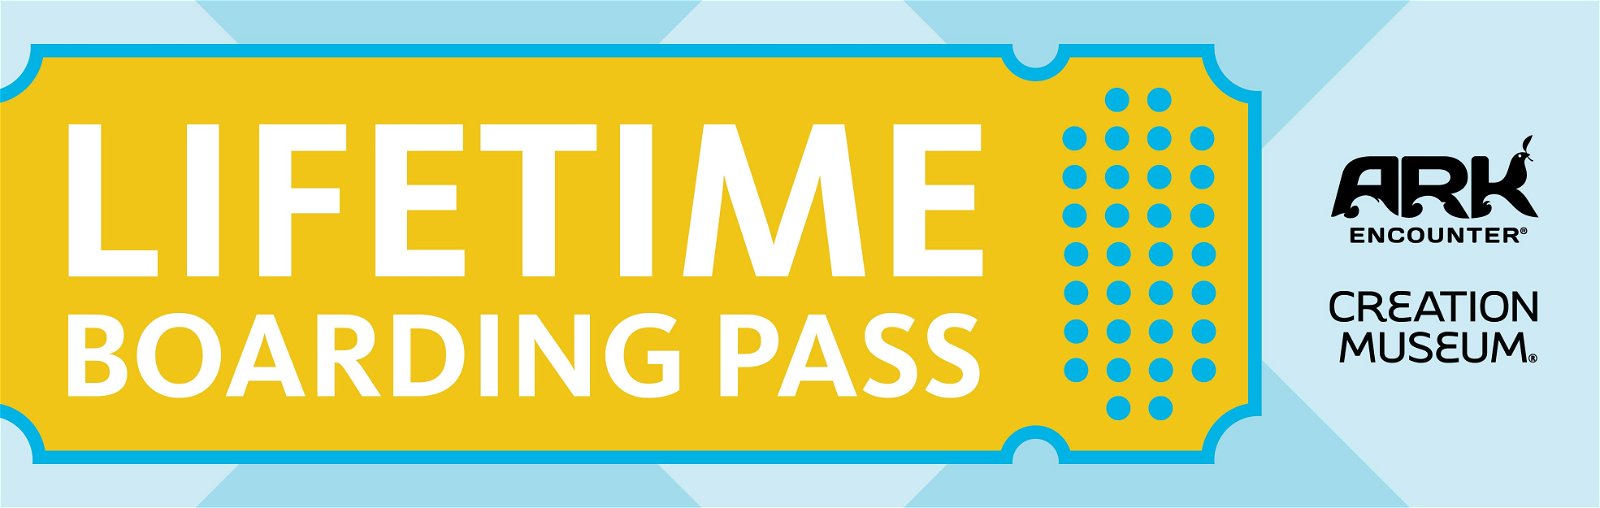 Lifetime Boarding Pass: The Gift That Lasts a Lifetime